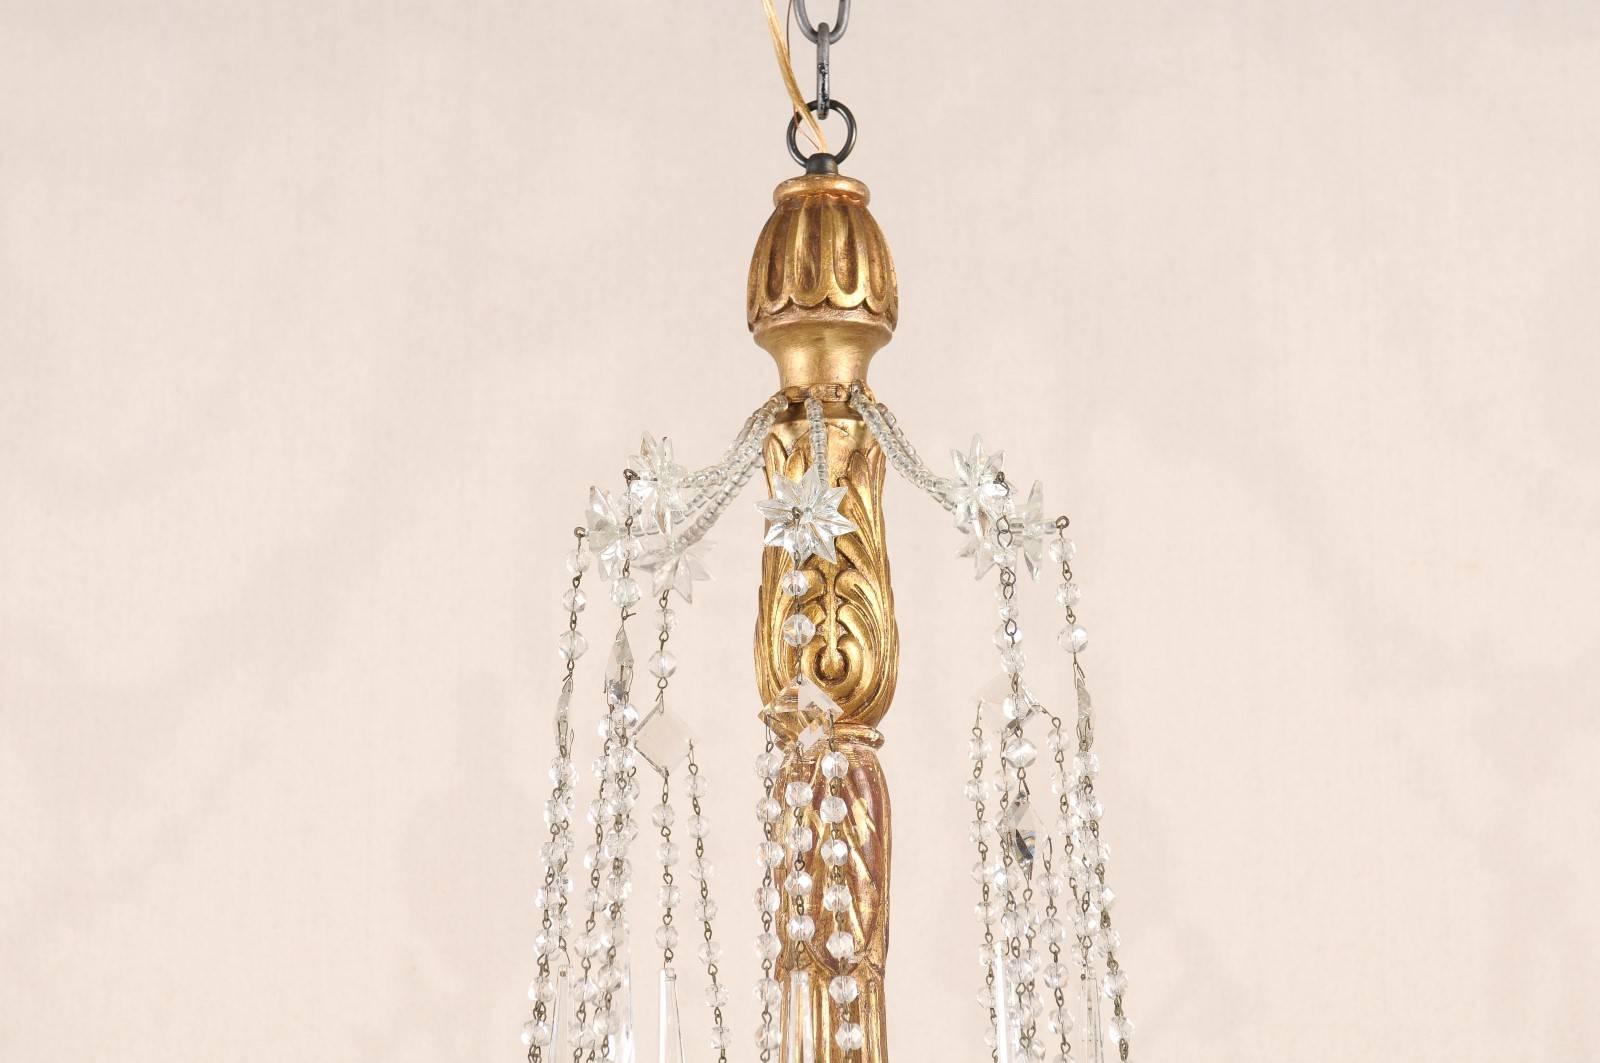 Italian Crystal and Giltwood Chandelier from the 19th Century - Gold Color 2